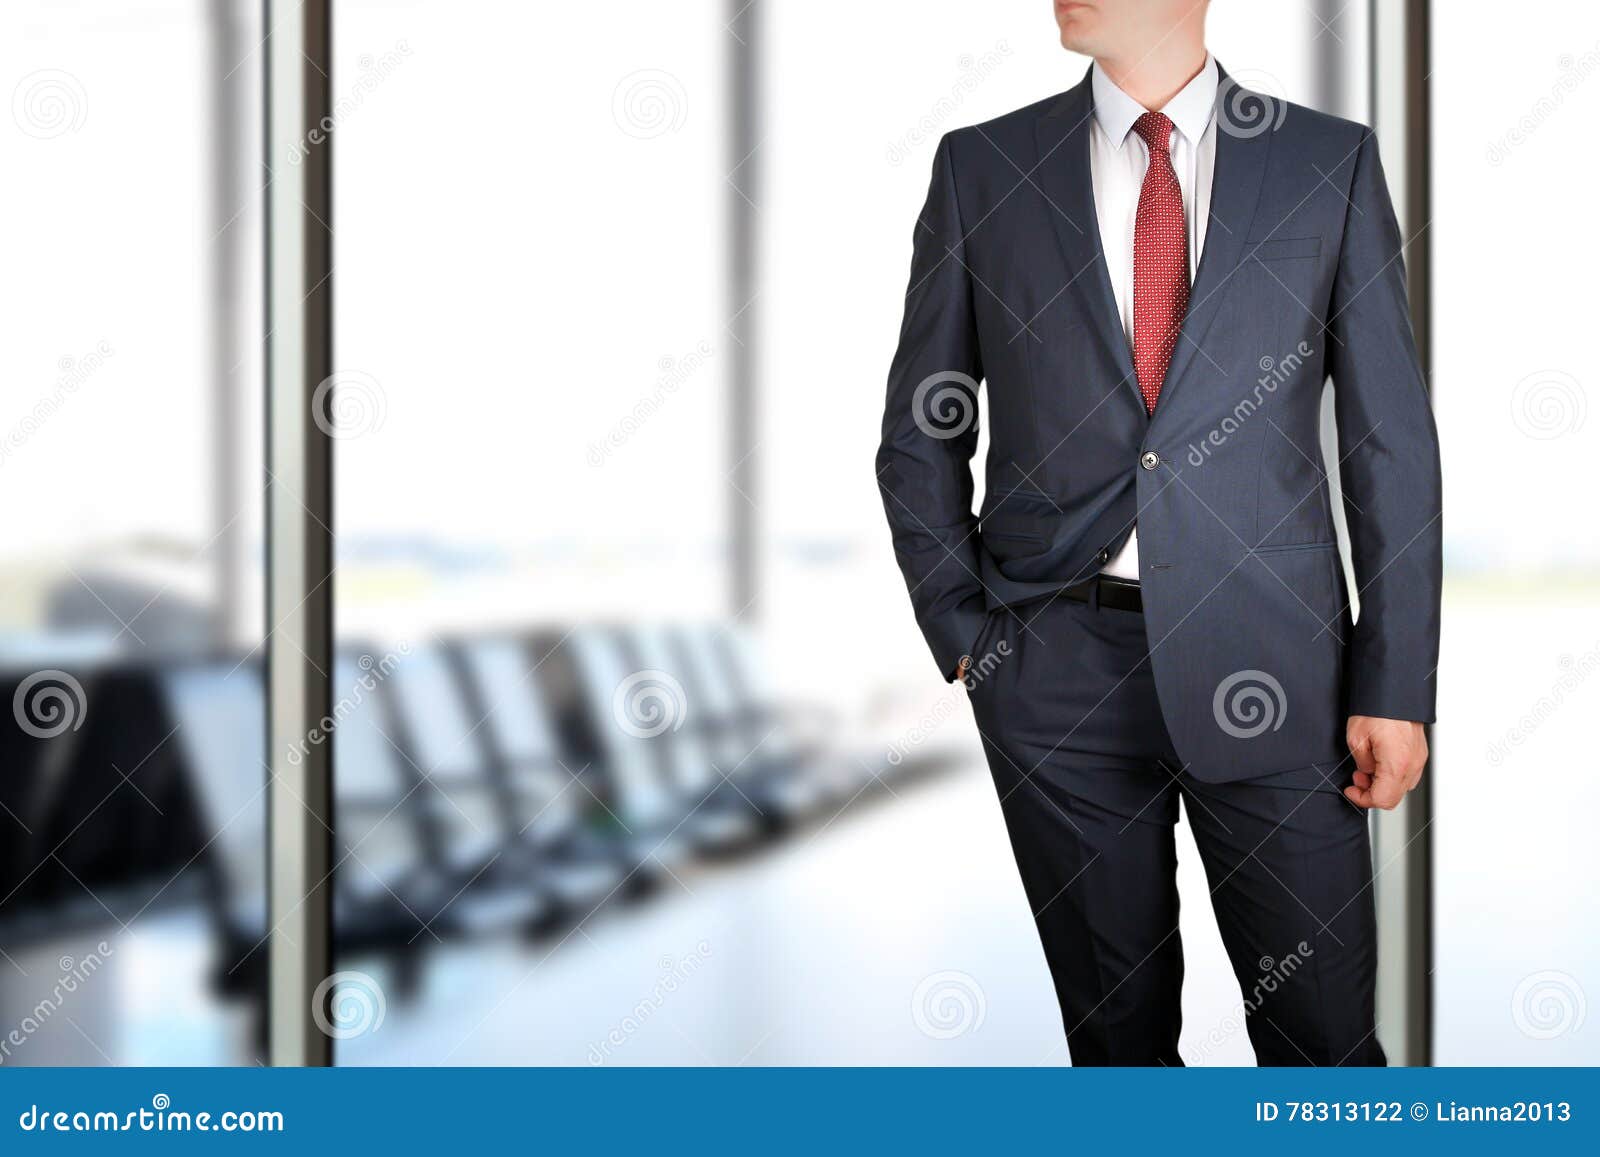 business and office concept - elegant young fashion buisness man in a blue/navy suit.